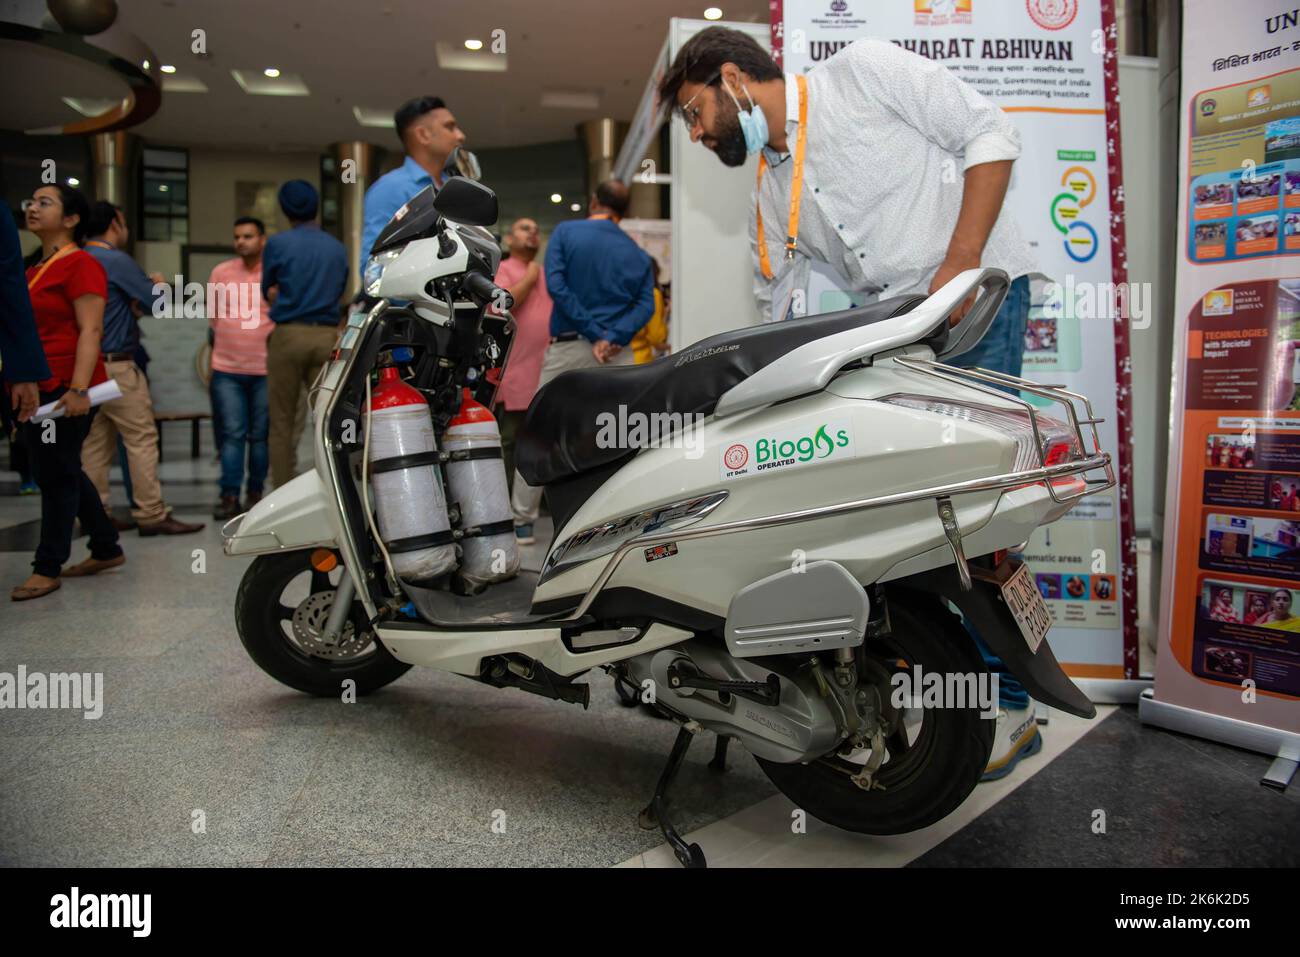 Student of Indian Institute of Technology Delhi showcasing Biogas fuelled scooter during inaugural day of IInvenTiv 2022, the first ever all IITs (indian institute of technology) research and development Showcase at the Indian Institute of Technology. IInvenTiv 2022 is an R&D (research and development) Fair organised under the supervision of a Steering Committee headed by Dr. Pawan Goenka, Chairman, BoG (Board of Governors) IIT and the event marks the coming together of all the 23 IITs under one umbrella to showcase their respective research and innovation expertise. (Photo by Pradeep Gaur/S Stock Photo